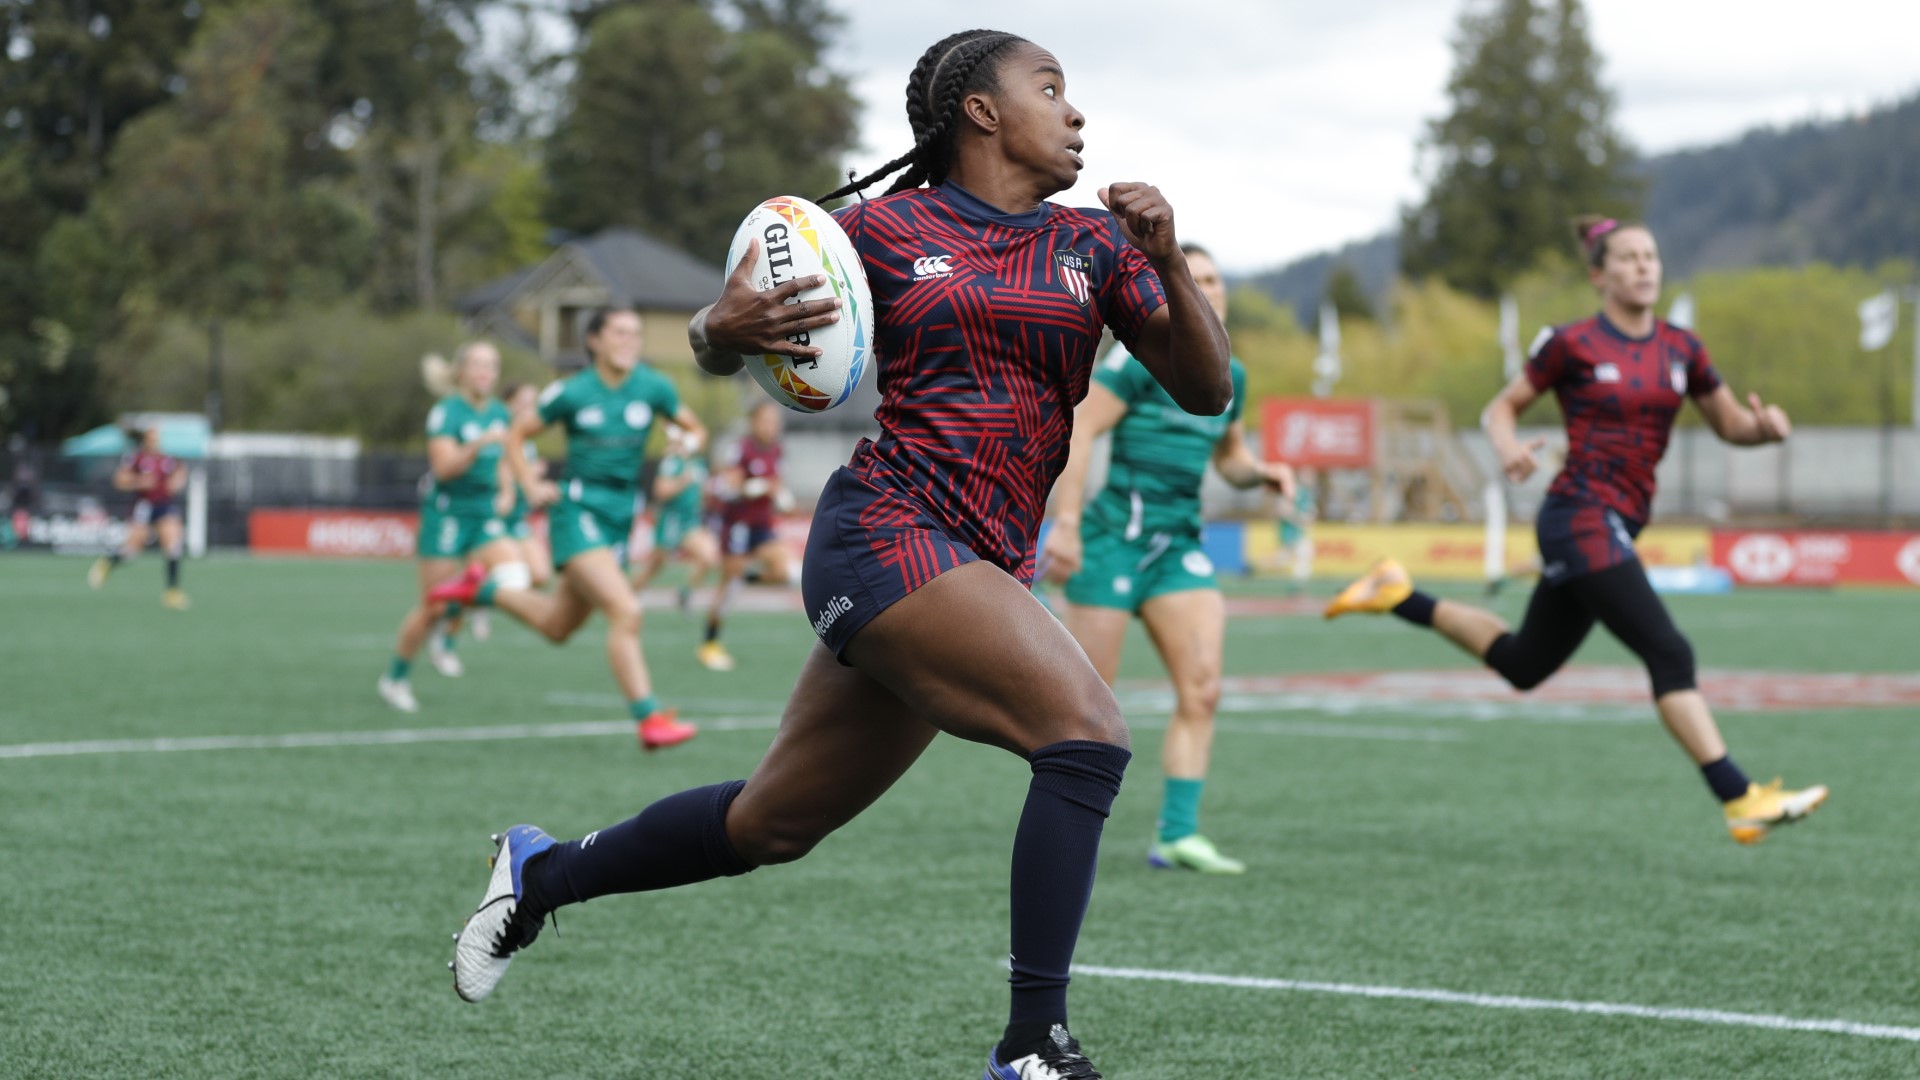 Jaz Gray got invited to try out for the USA Women's Rugby team and would ultimately be asked to play full-time.